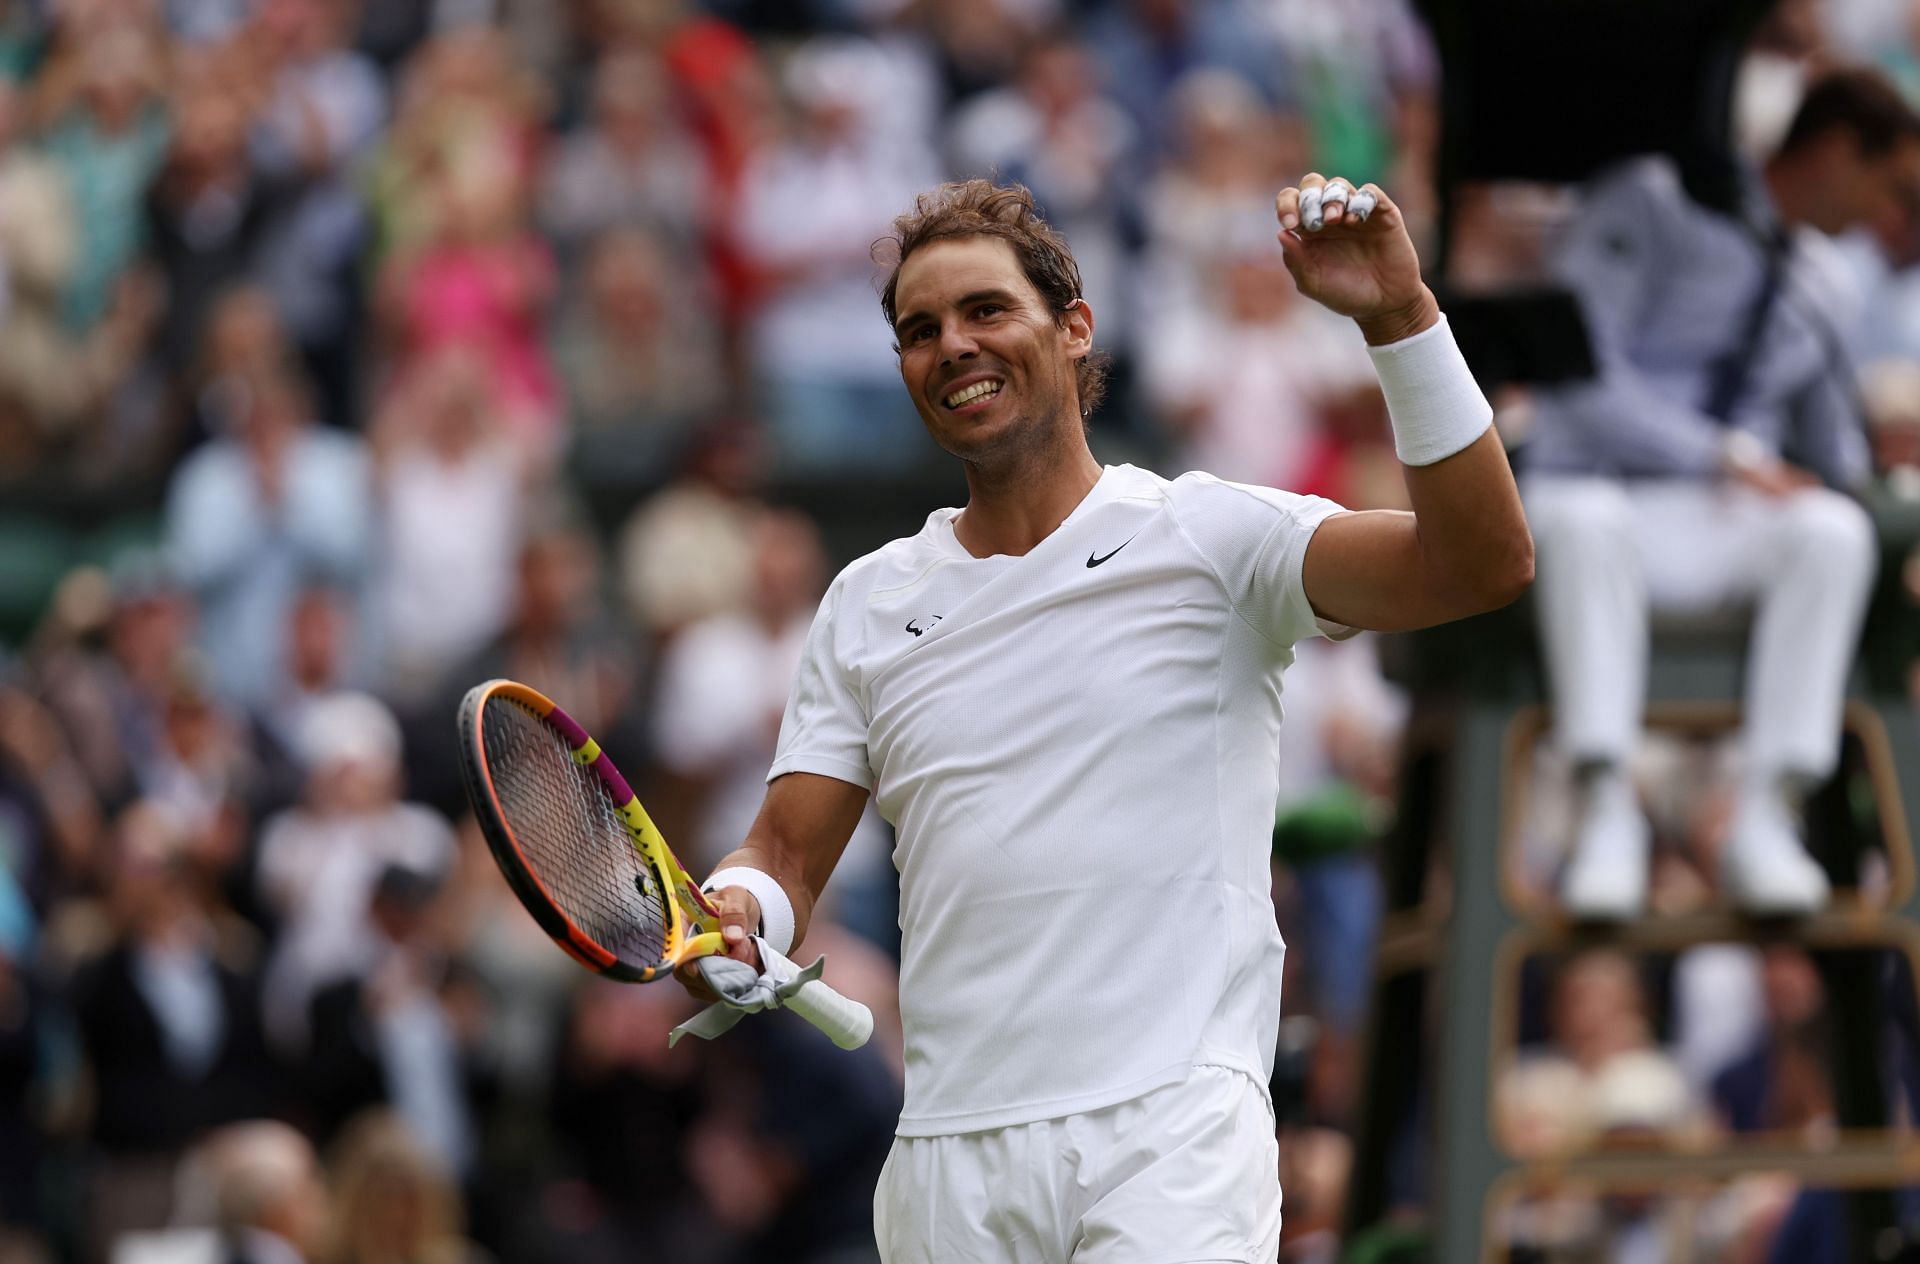 Rafael Nadal headlines the action on Day 4 of the 2022 Championships